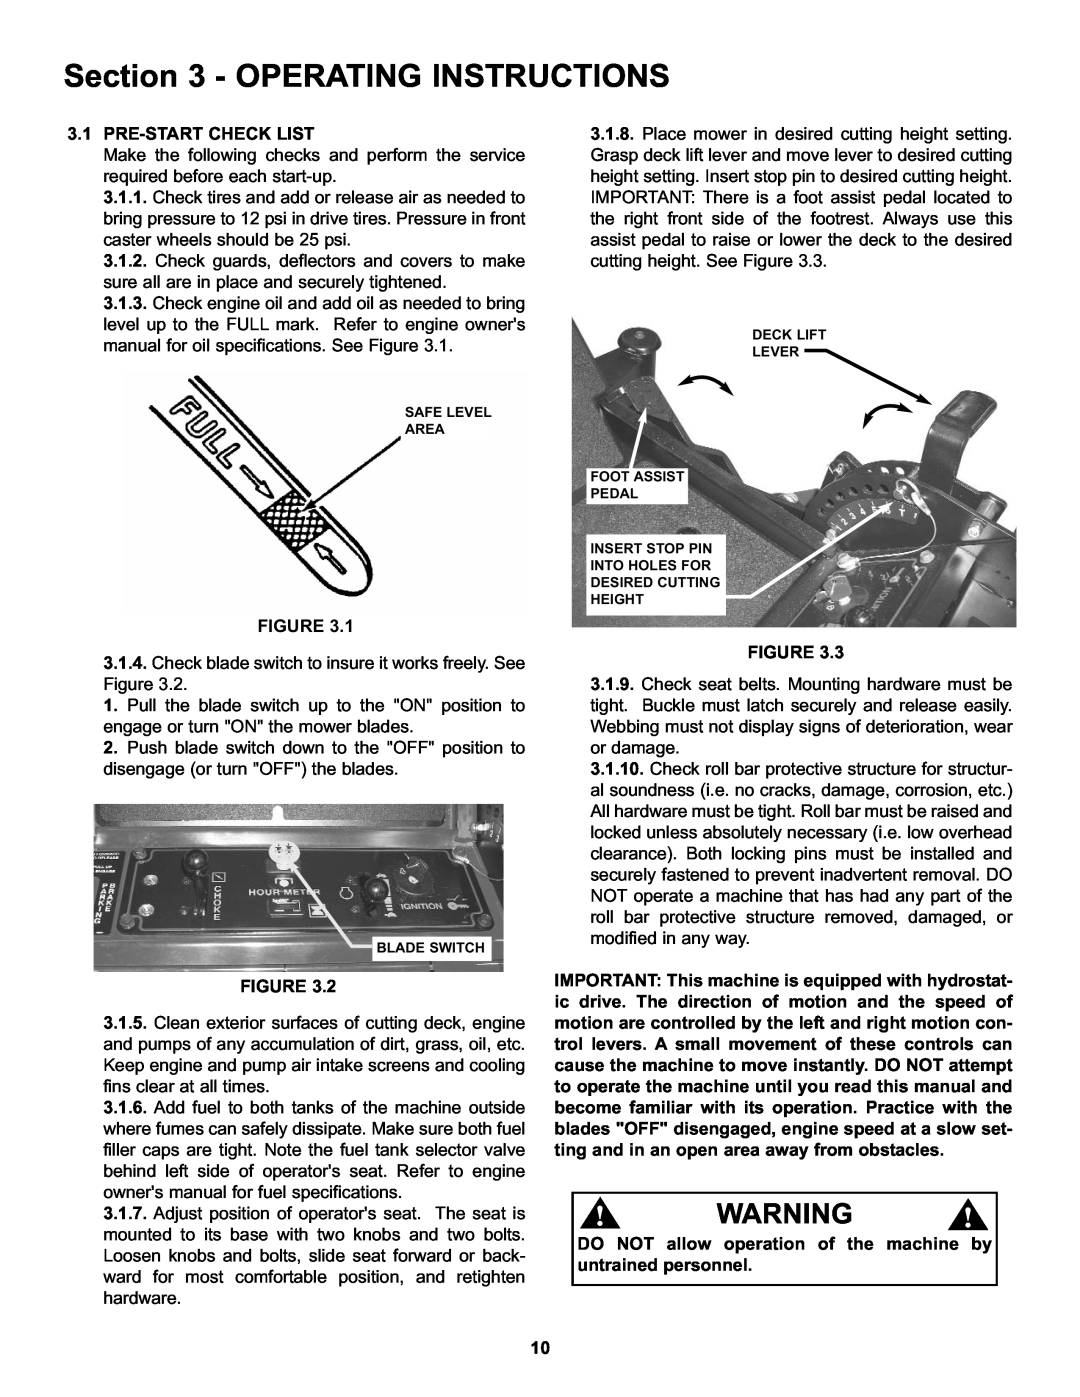 Snapper CZT19481KWV important safety instructions Operating Instructions, Pre-Start Check List 